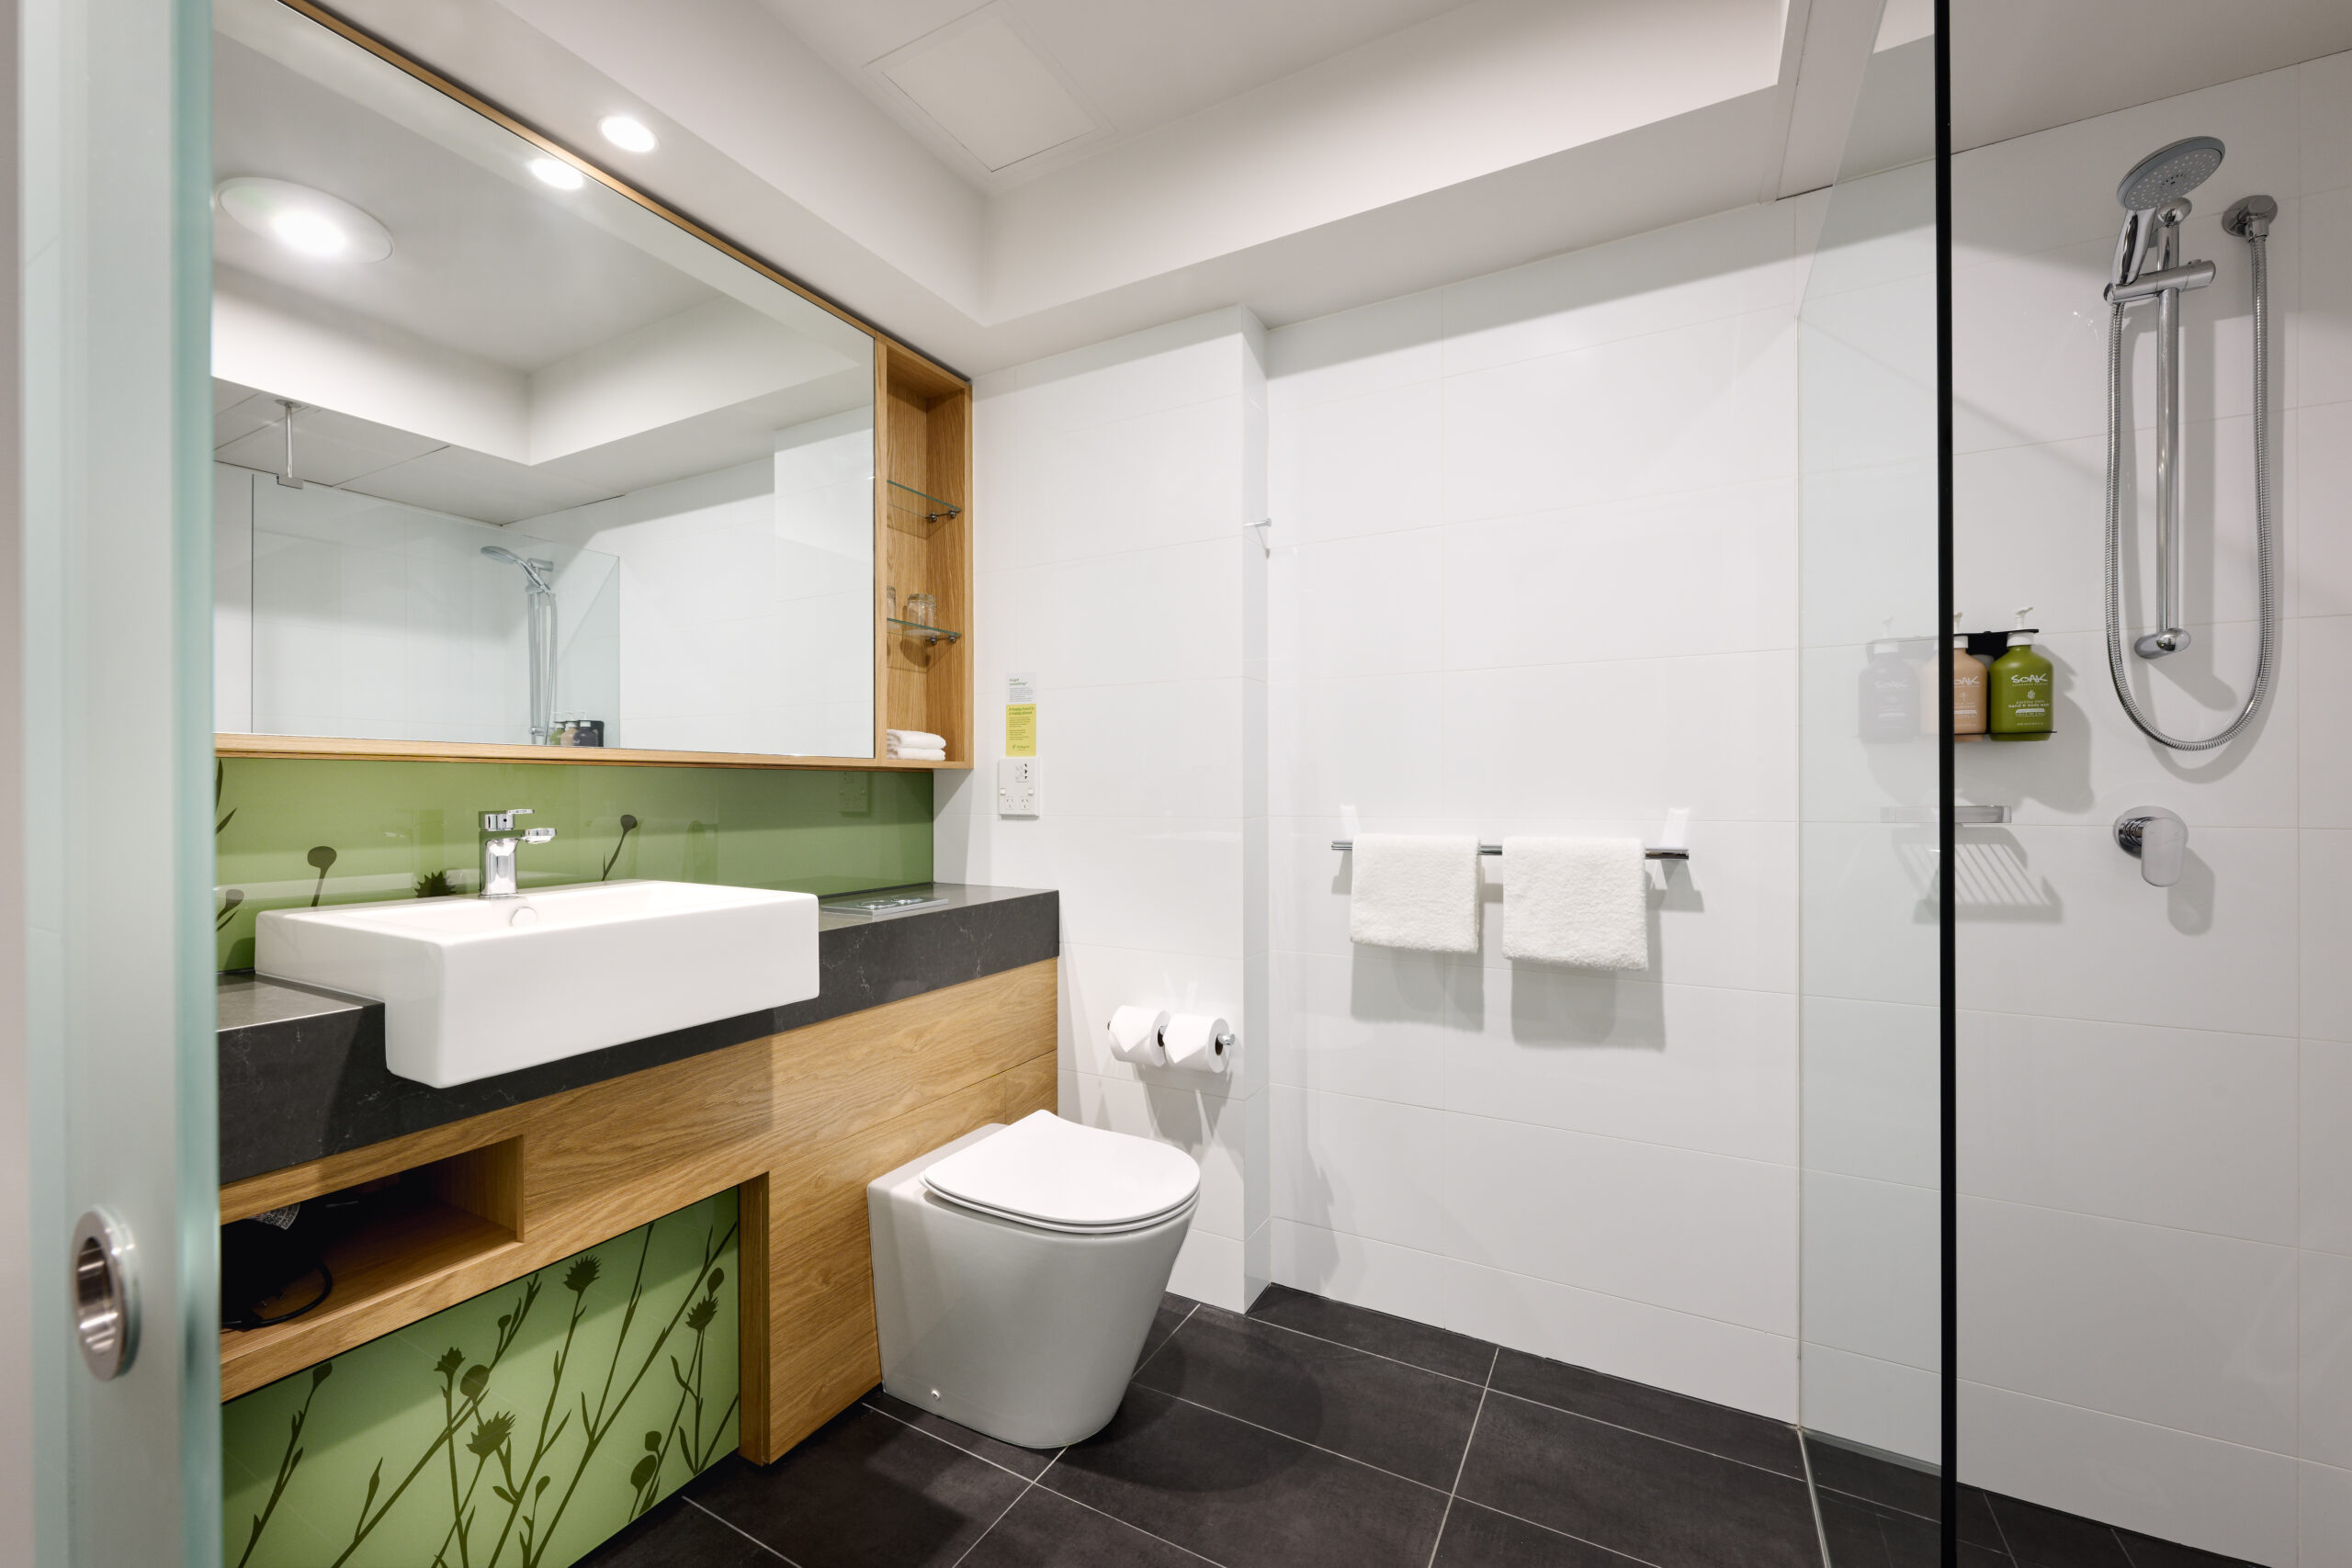 bathrooms with Soak amenities and showers. Baths upon request depending upon availability